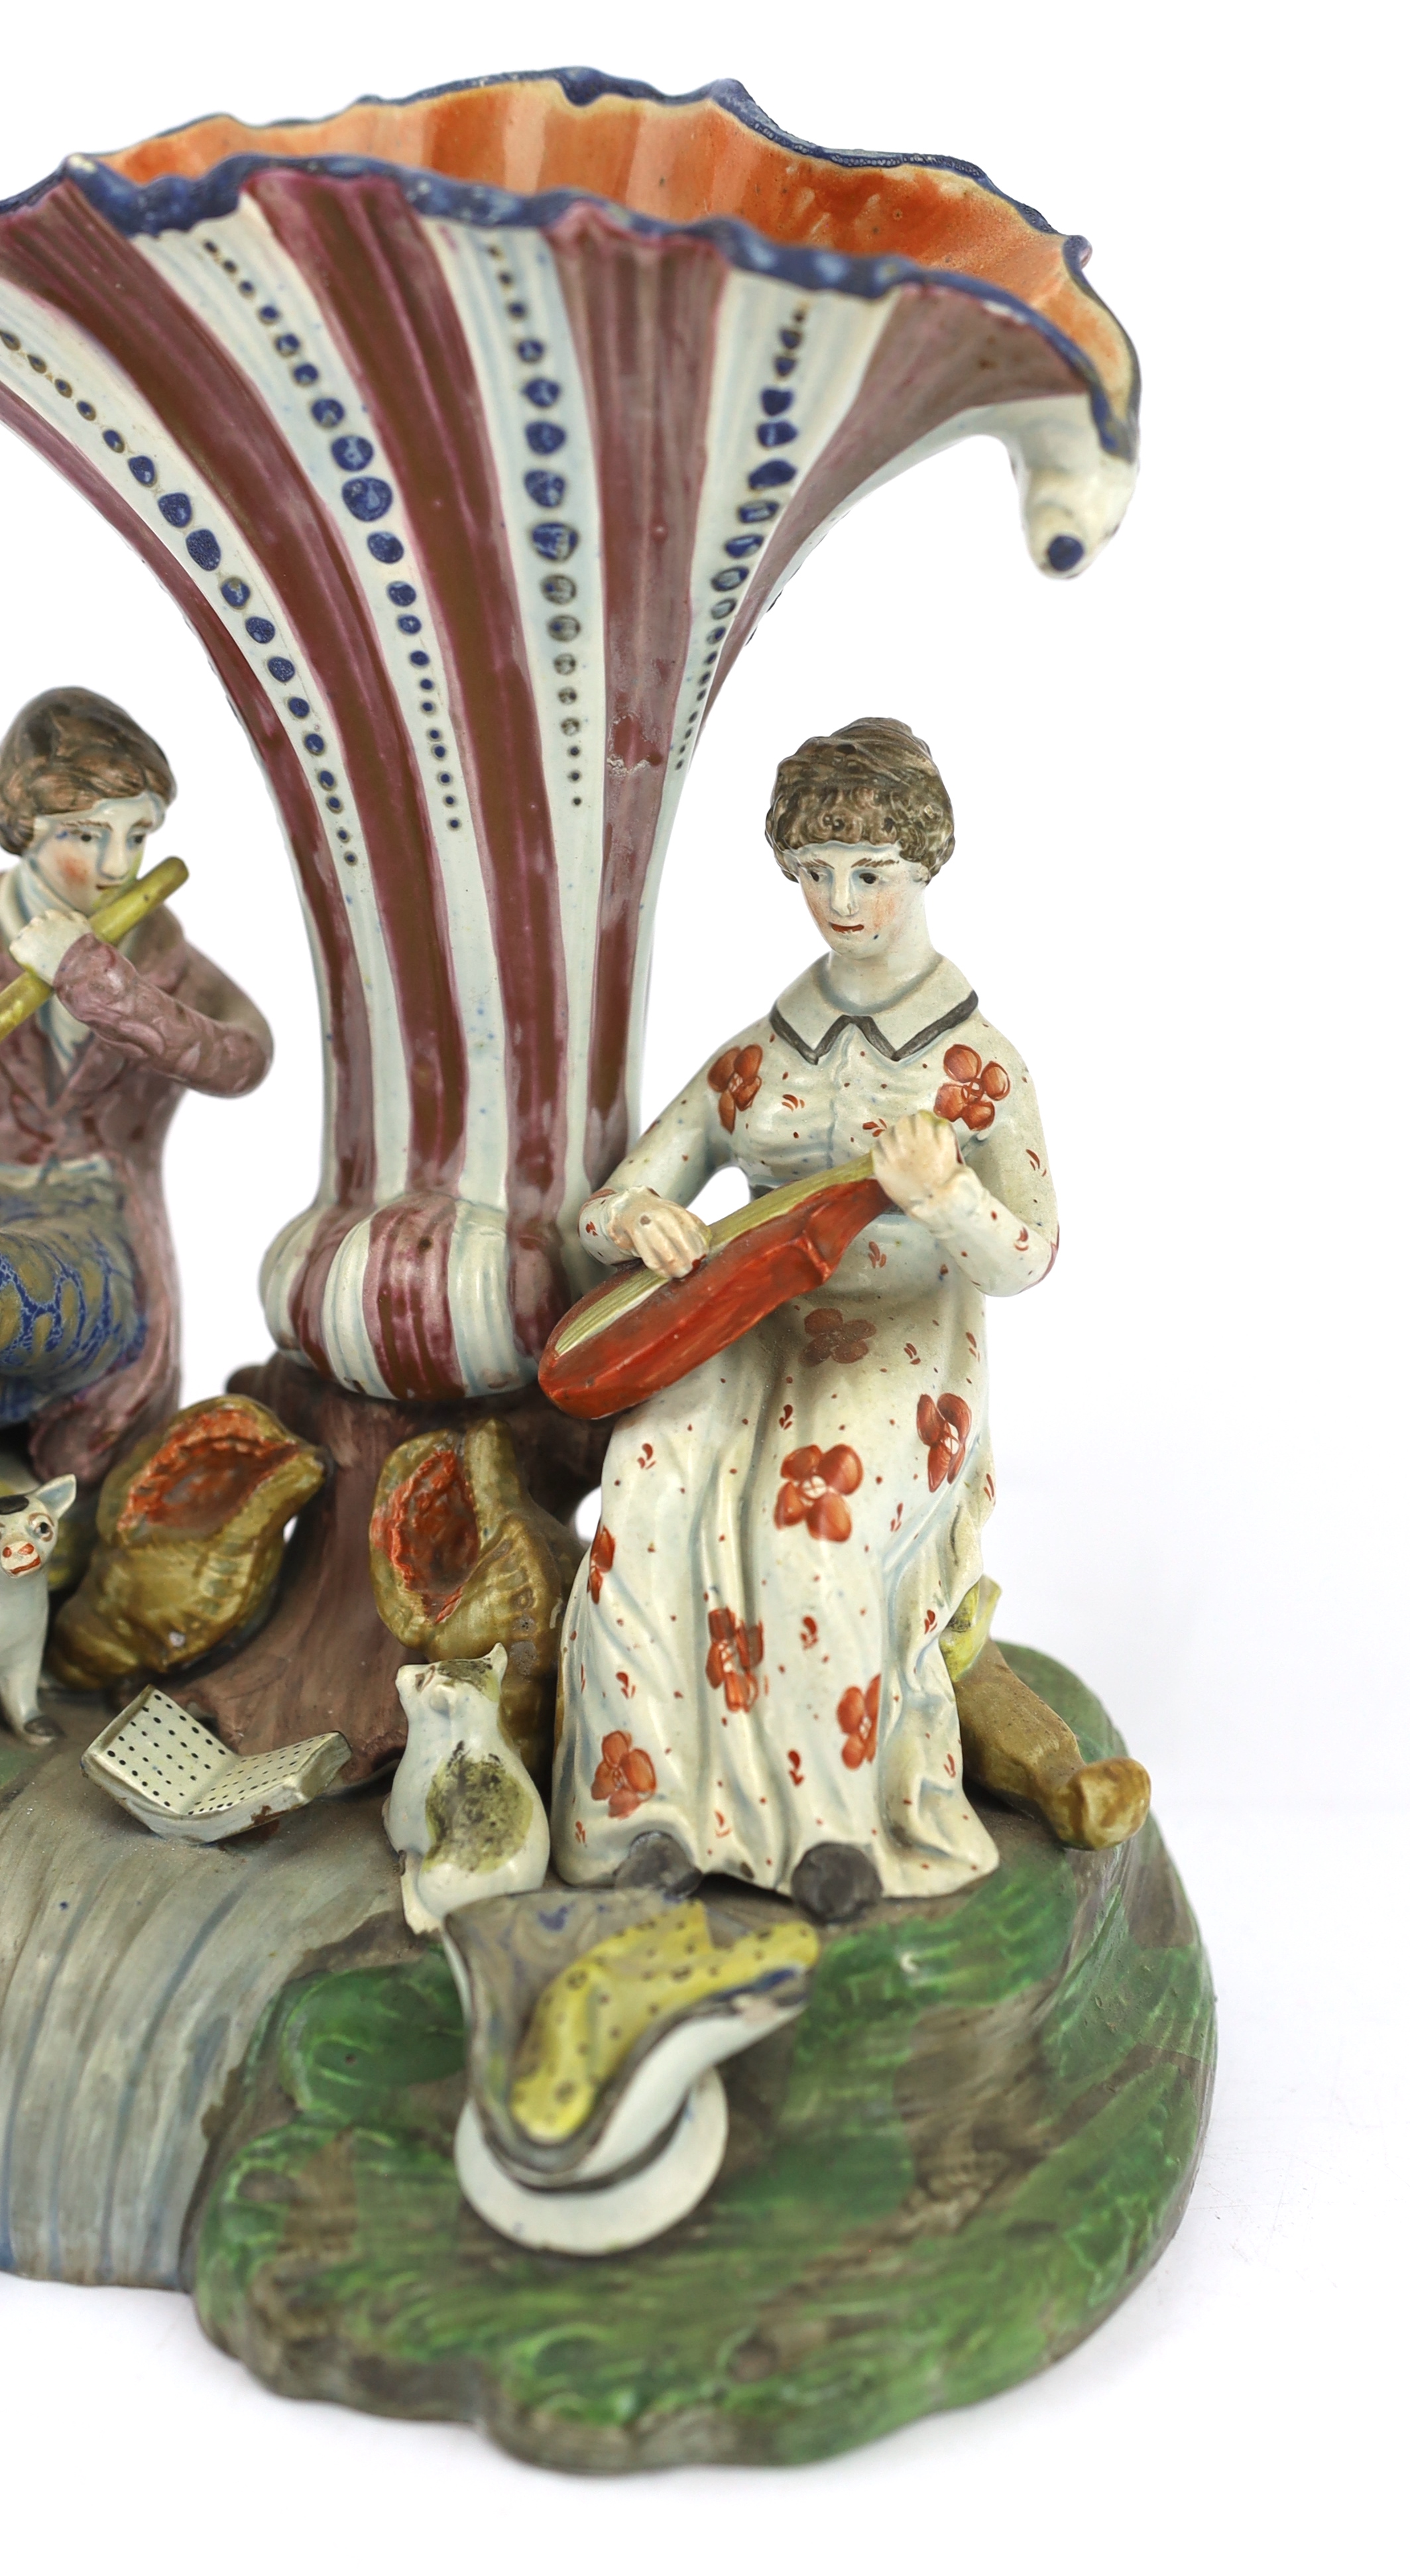 A Staffordshire pearlware musical duet spill vase, c.1820, small repair and loss